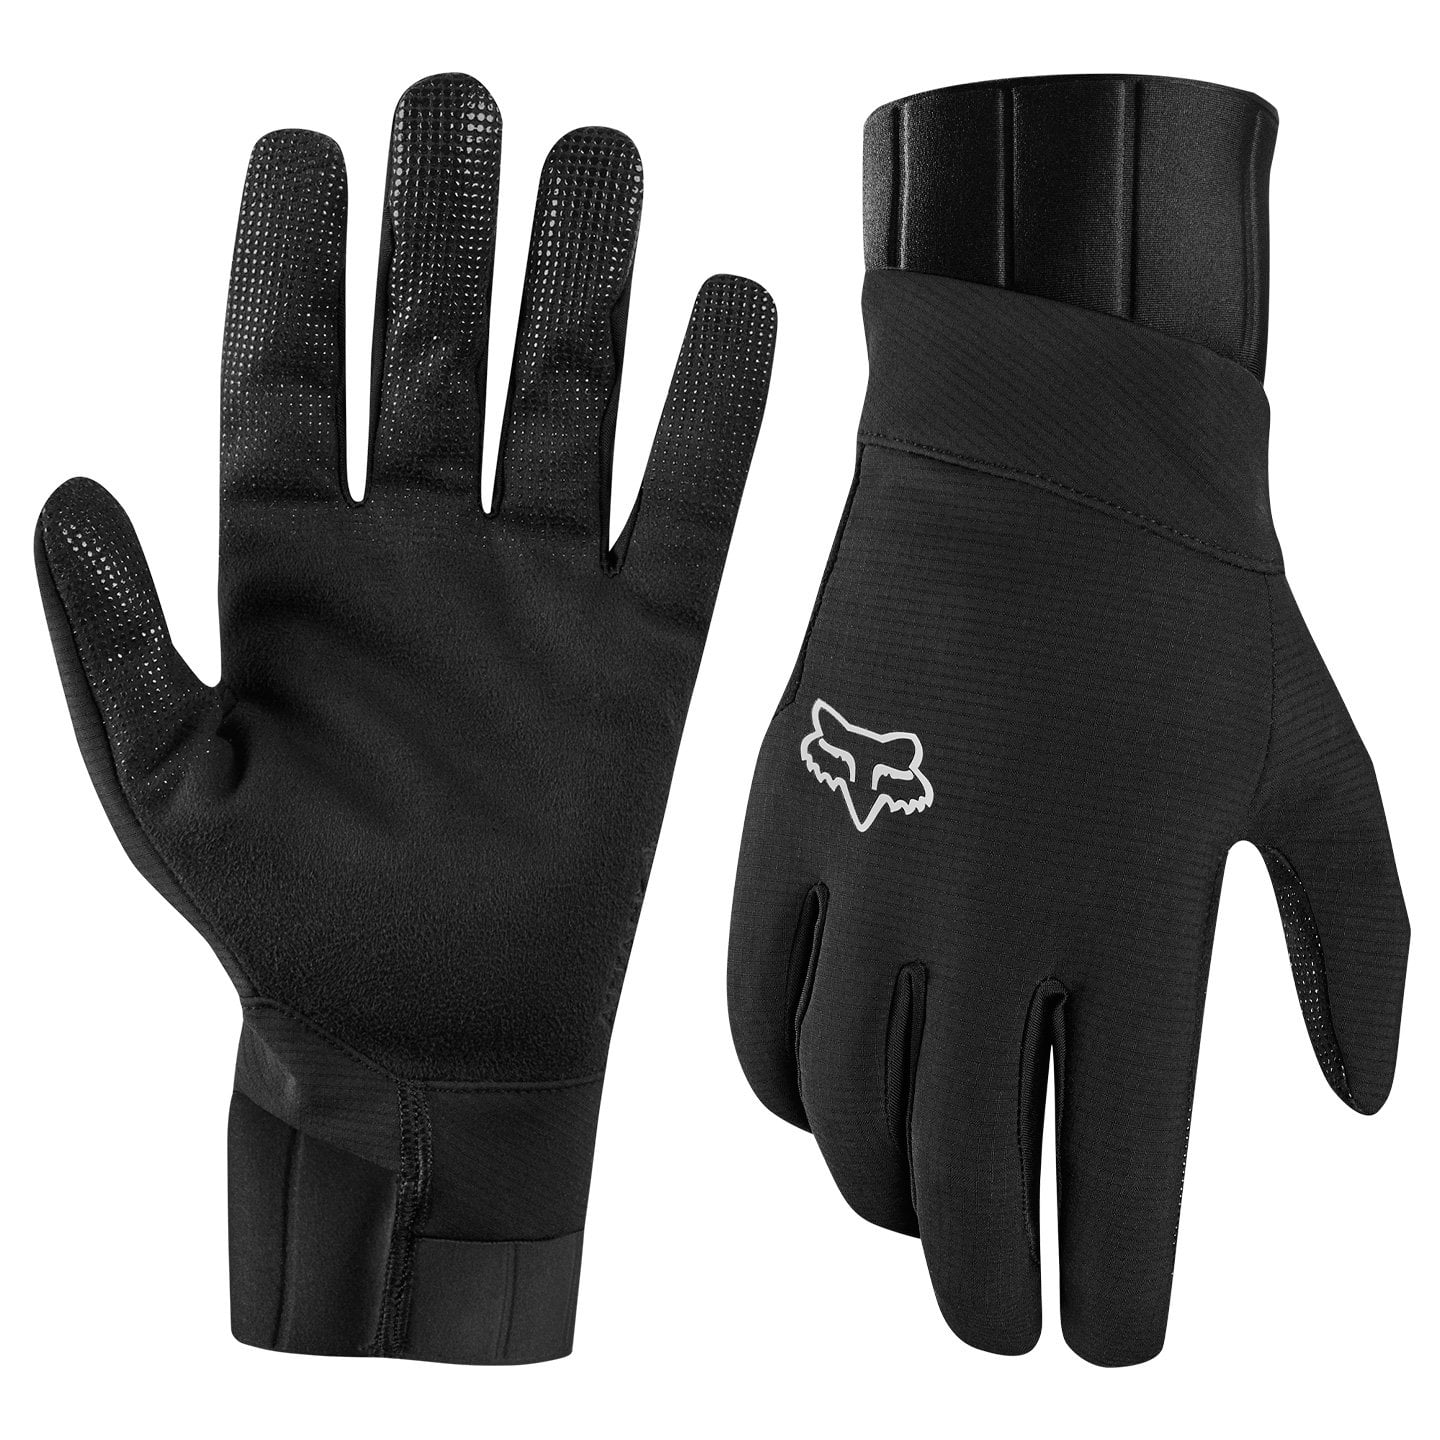 FOX Defend Pro Fire Full Finger Gloves Cycling Gloves, for men, size M, Cycling gloves, Cycling gear